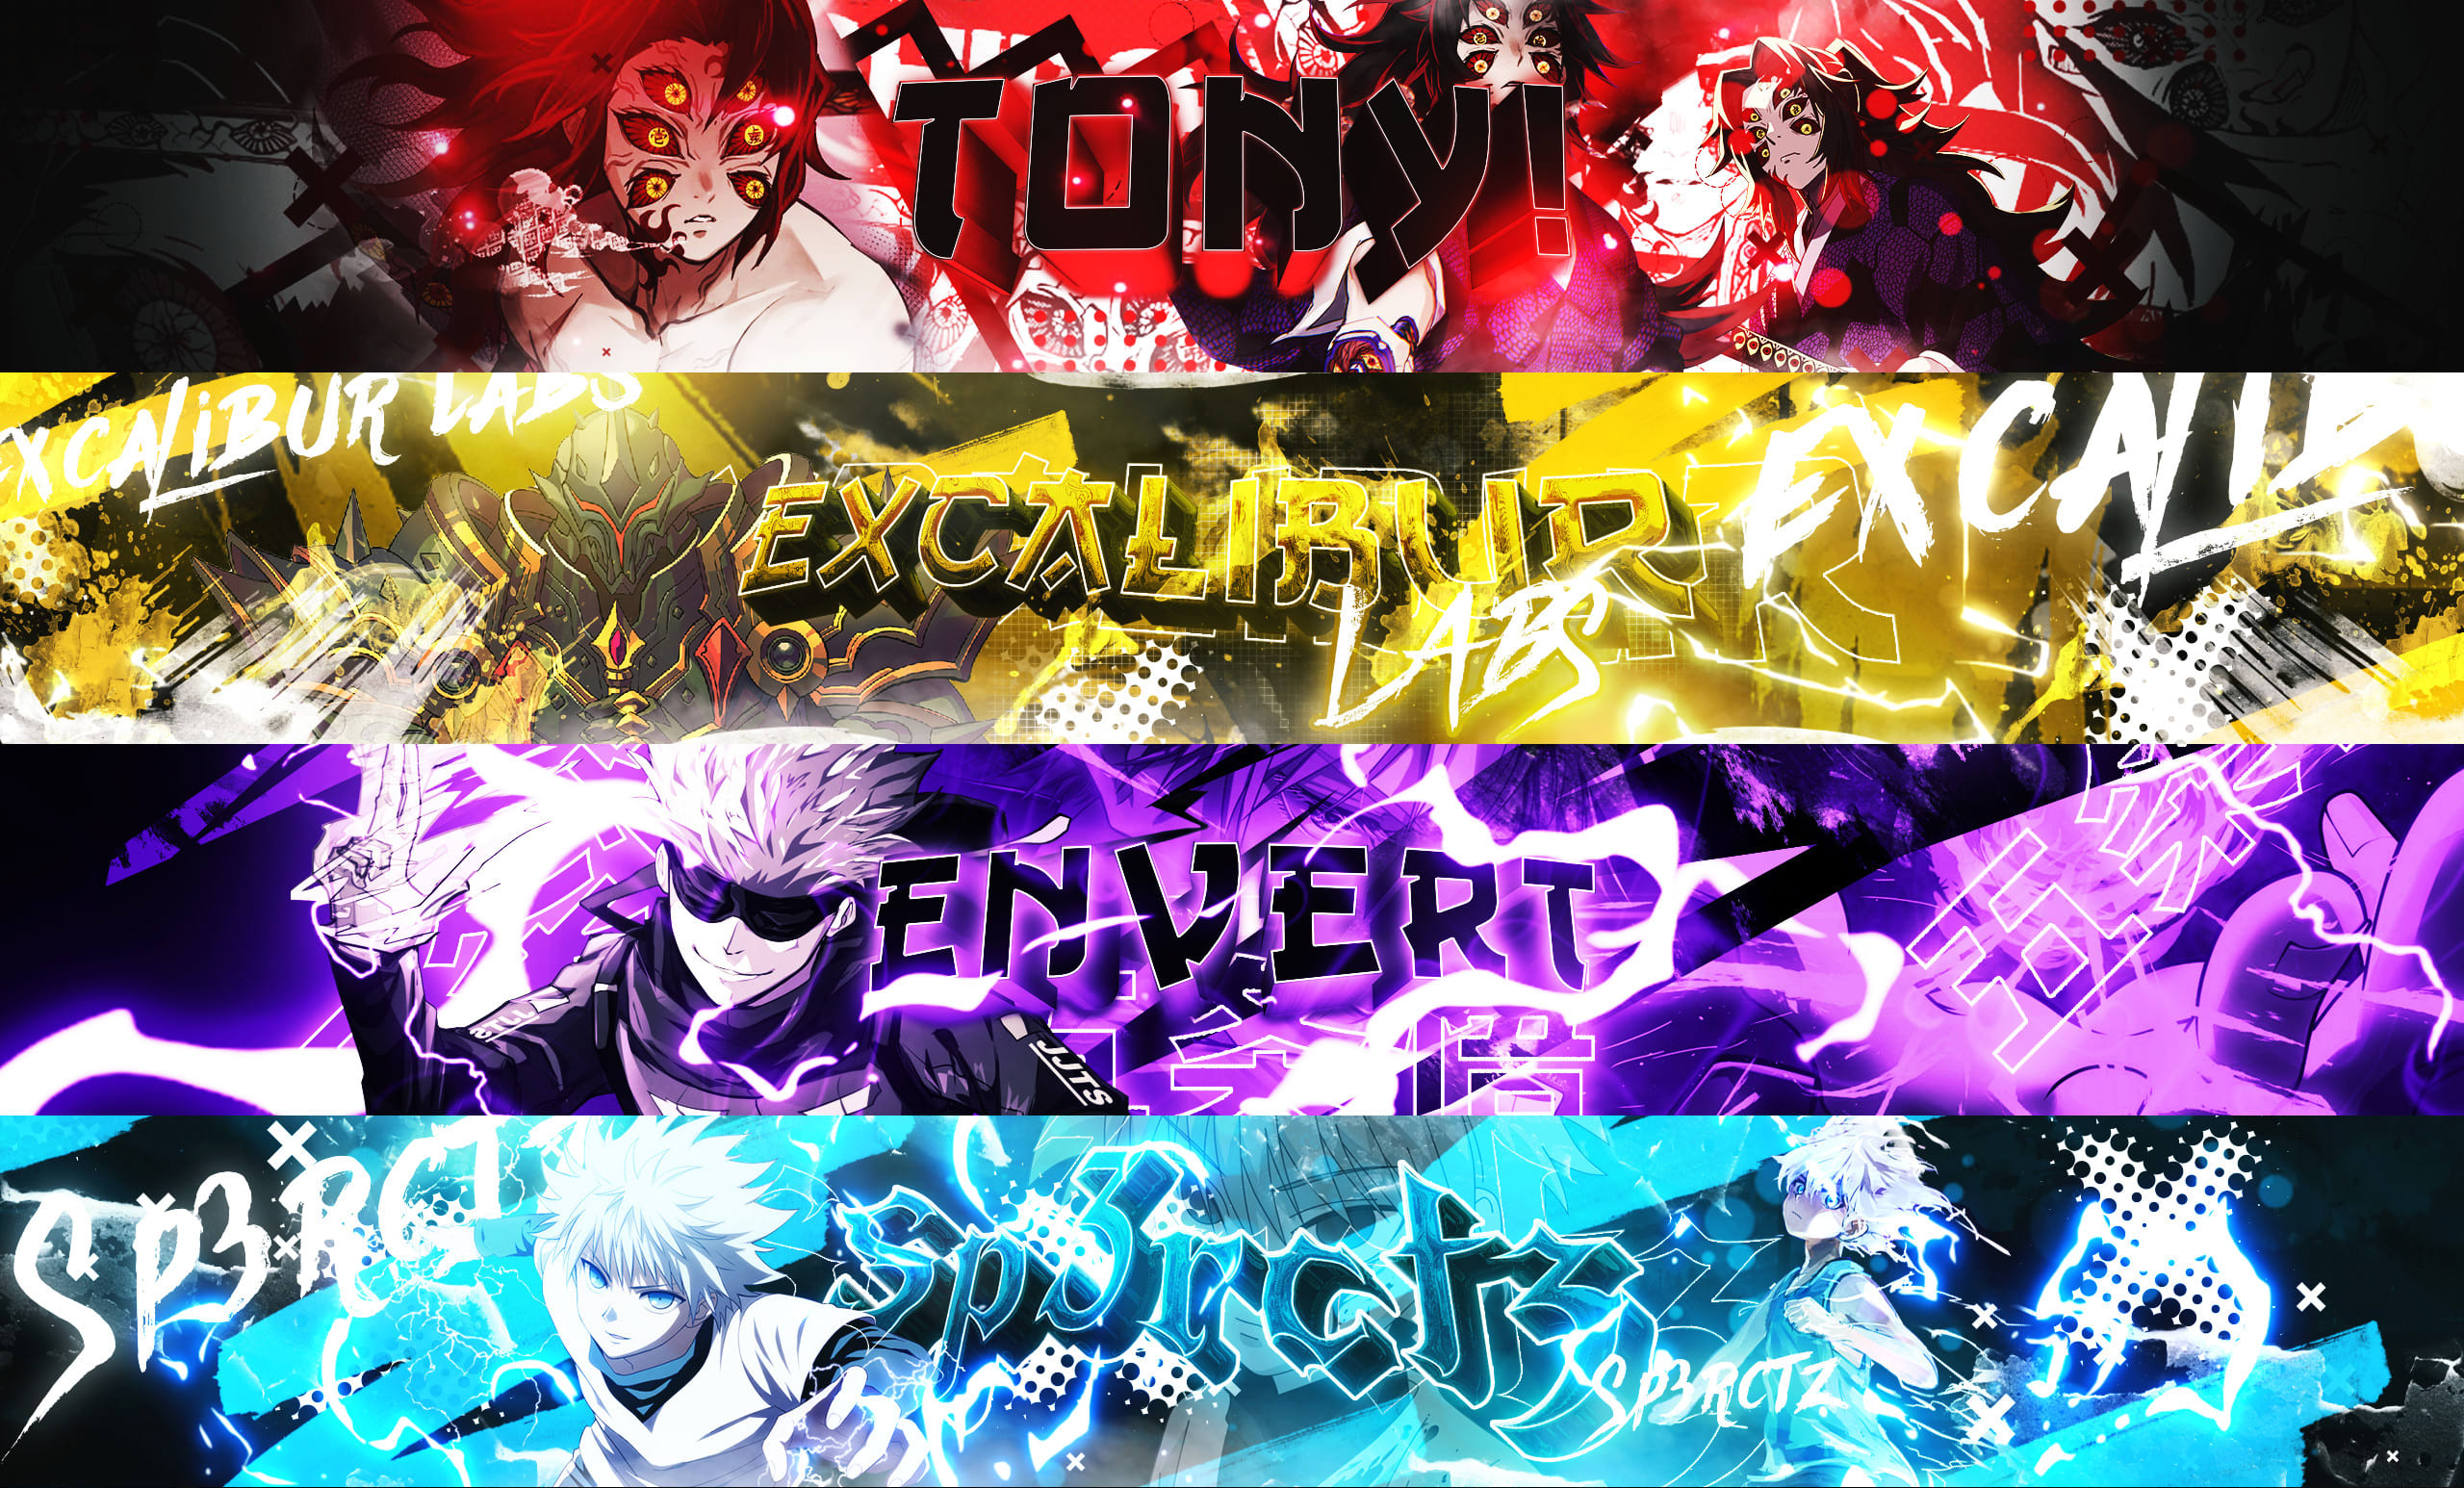 Top 10 Anime Channel Banners For YouTube | Free Download | Anime Banner  Templates | MrSACHIN2.O | - YouTube